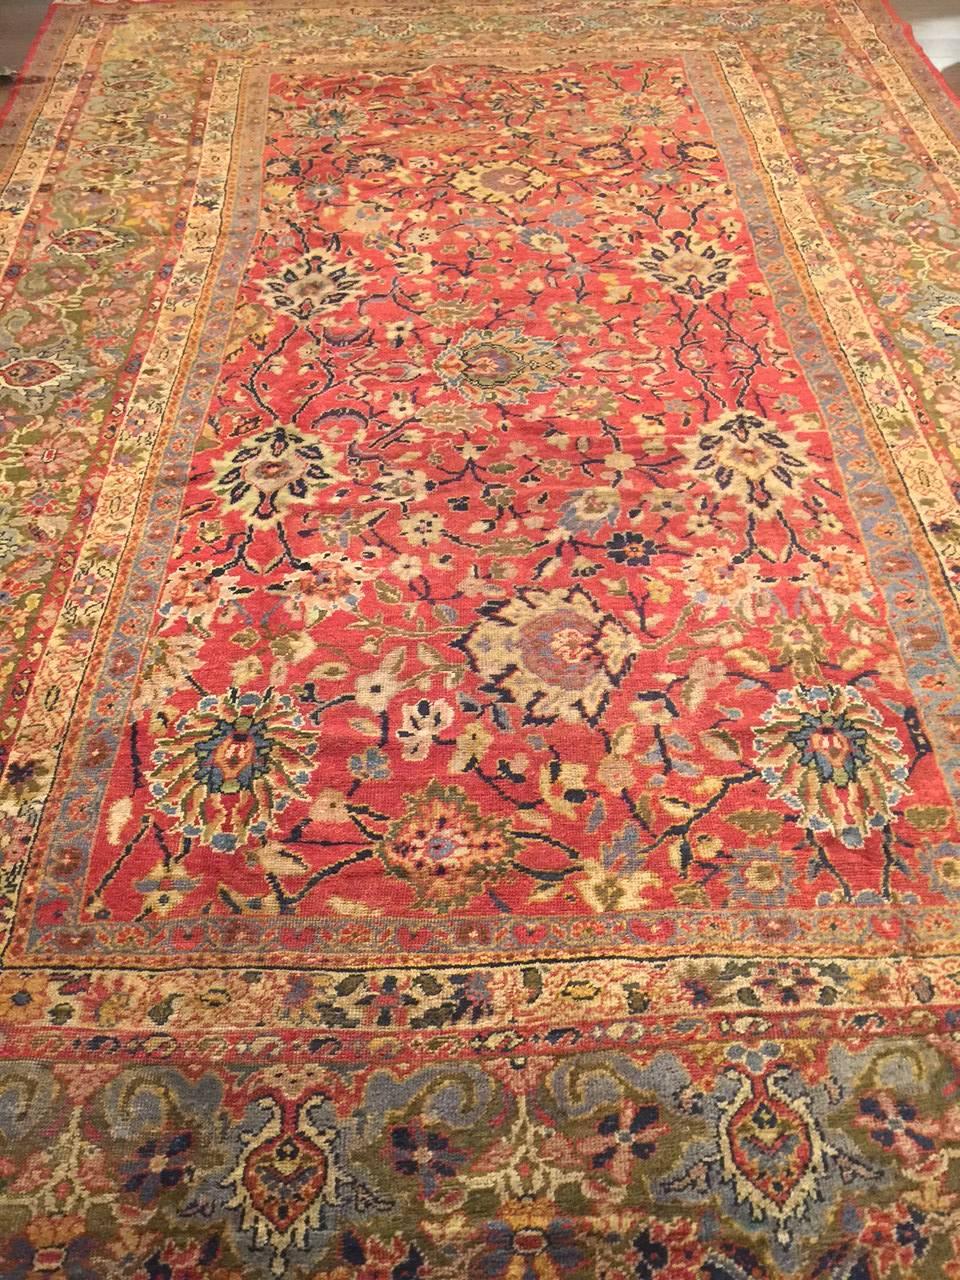 Antique Persian Ziegler rug, circa 1900. Size: 9'2 x 13'5. The Ziegler Company from Manchester was one of the earliest dealers and manufacturers of carpets operating in Persia and commissioning these carpets. They were active in Persia between